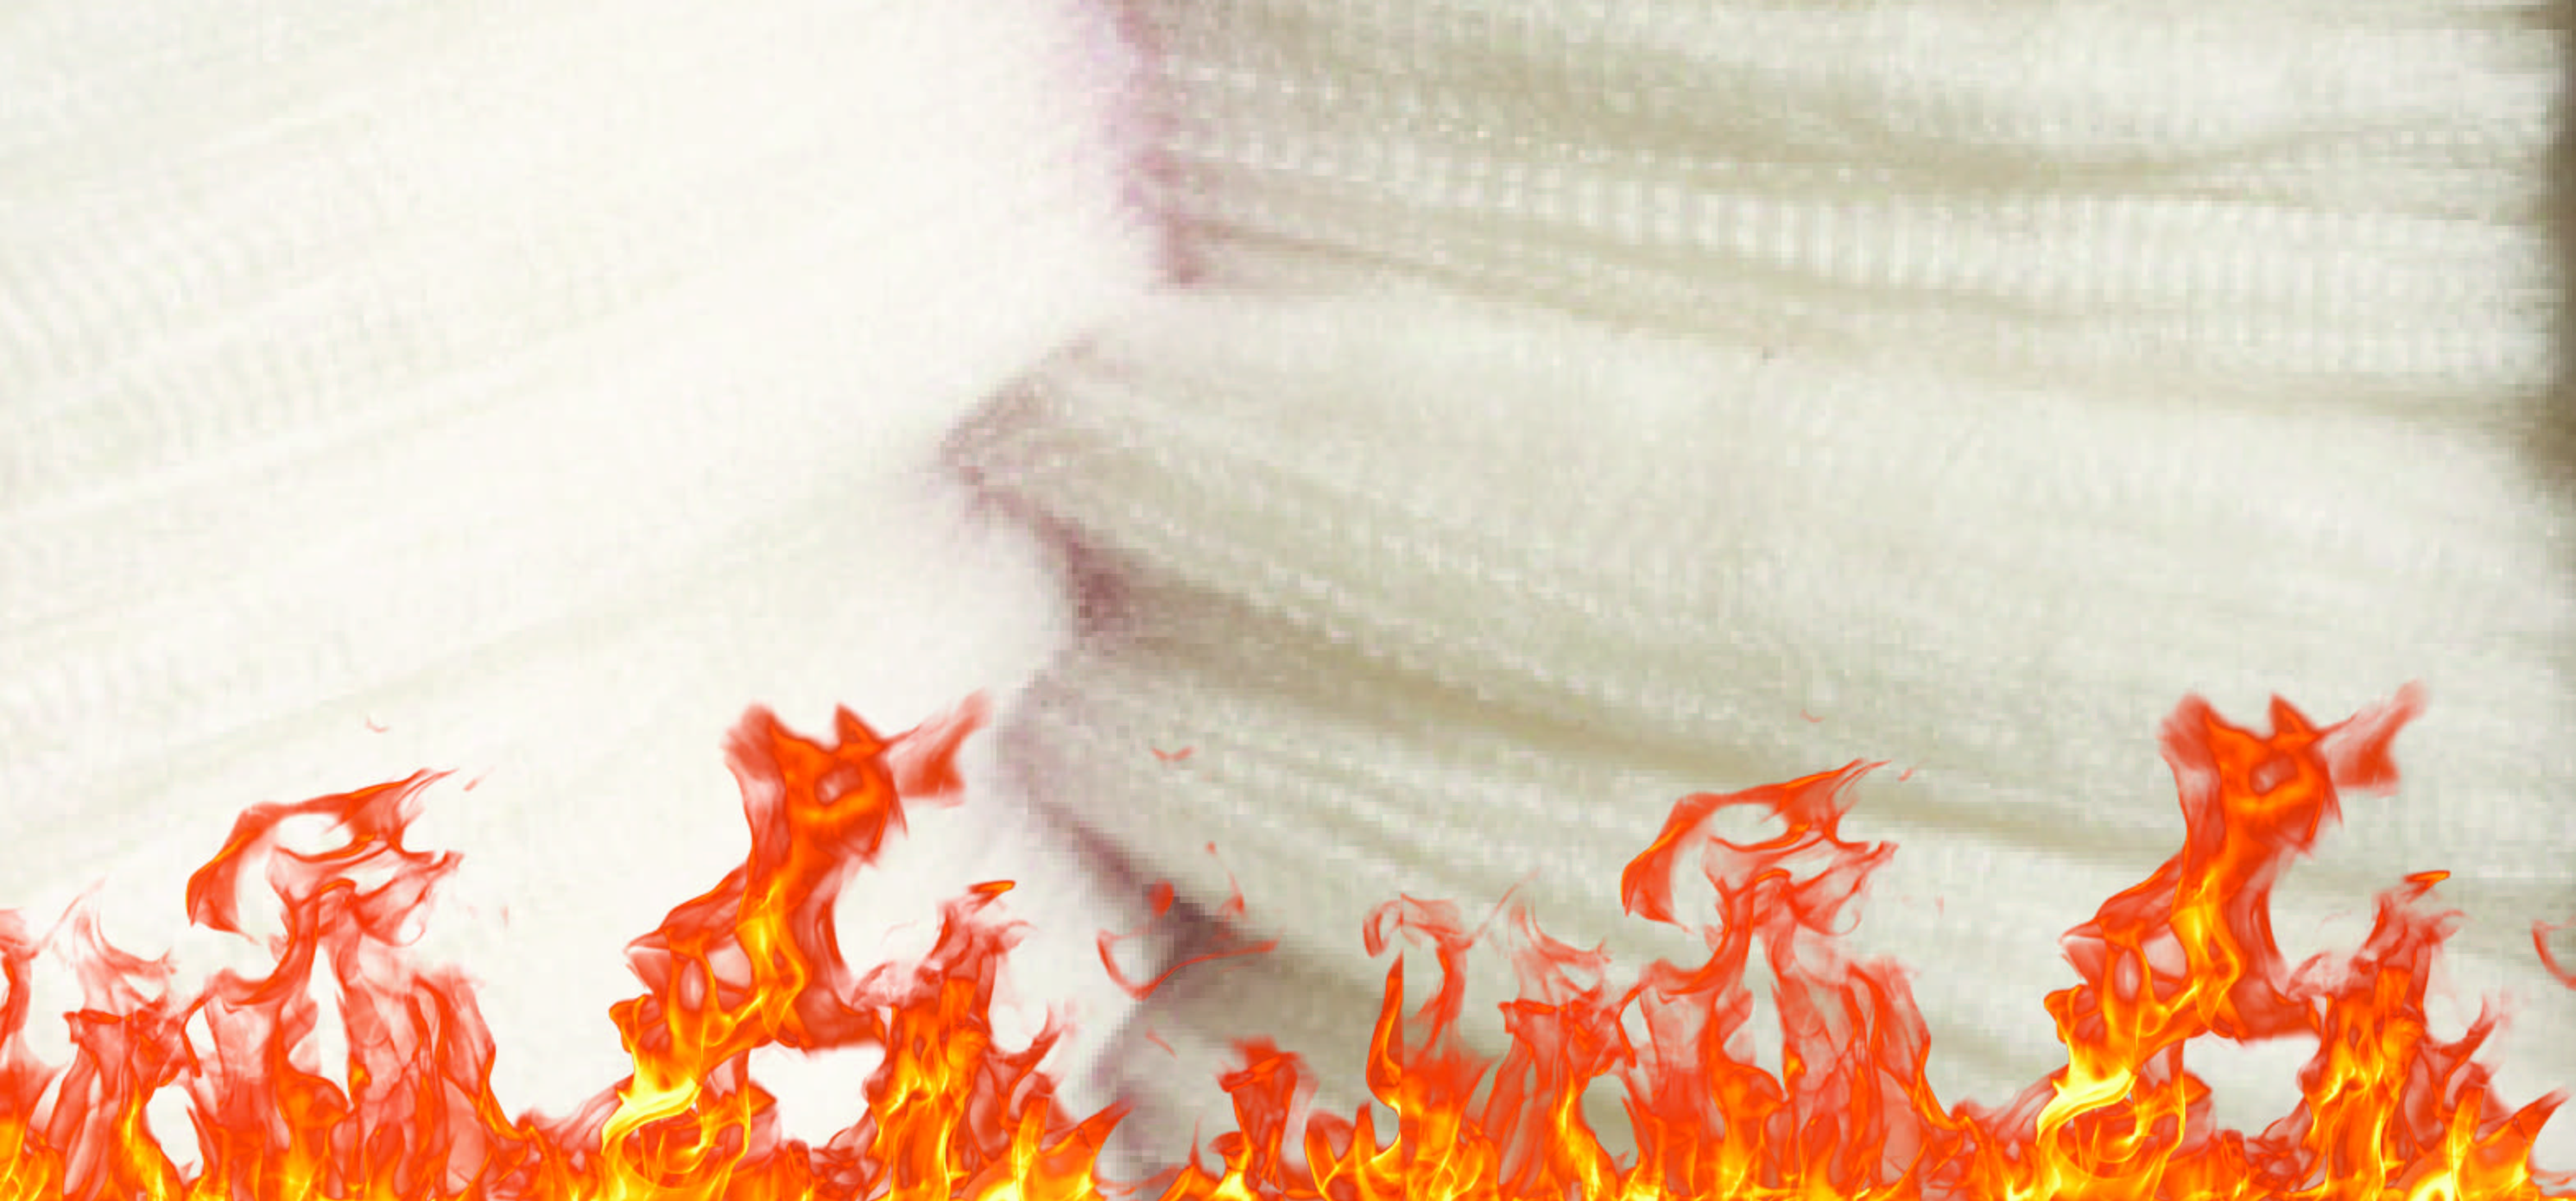 How wool is fire resistant compared to other fibres - MiniJumbuk